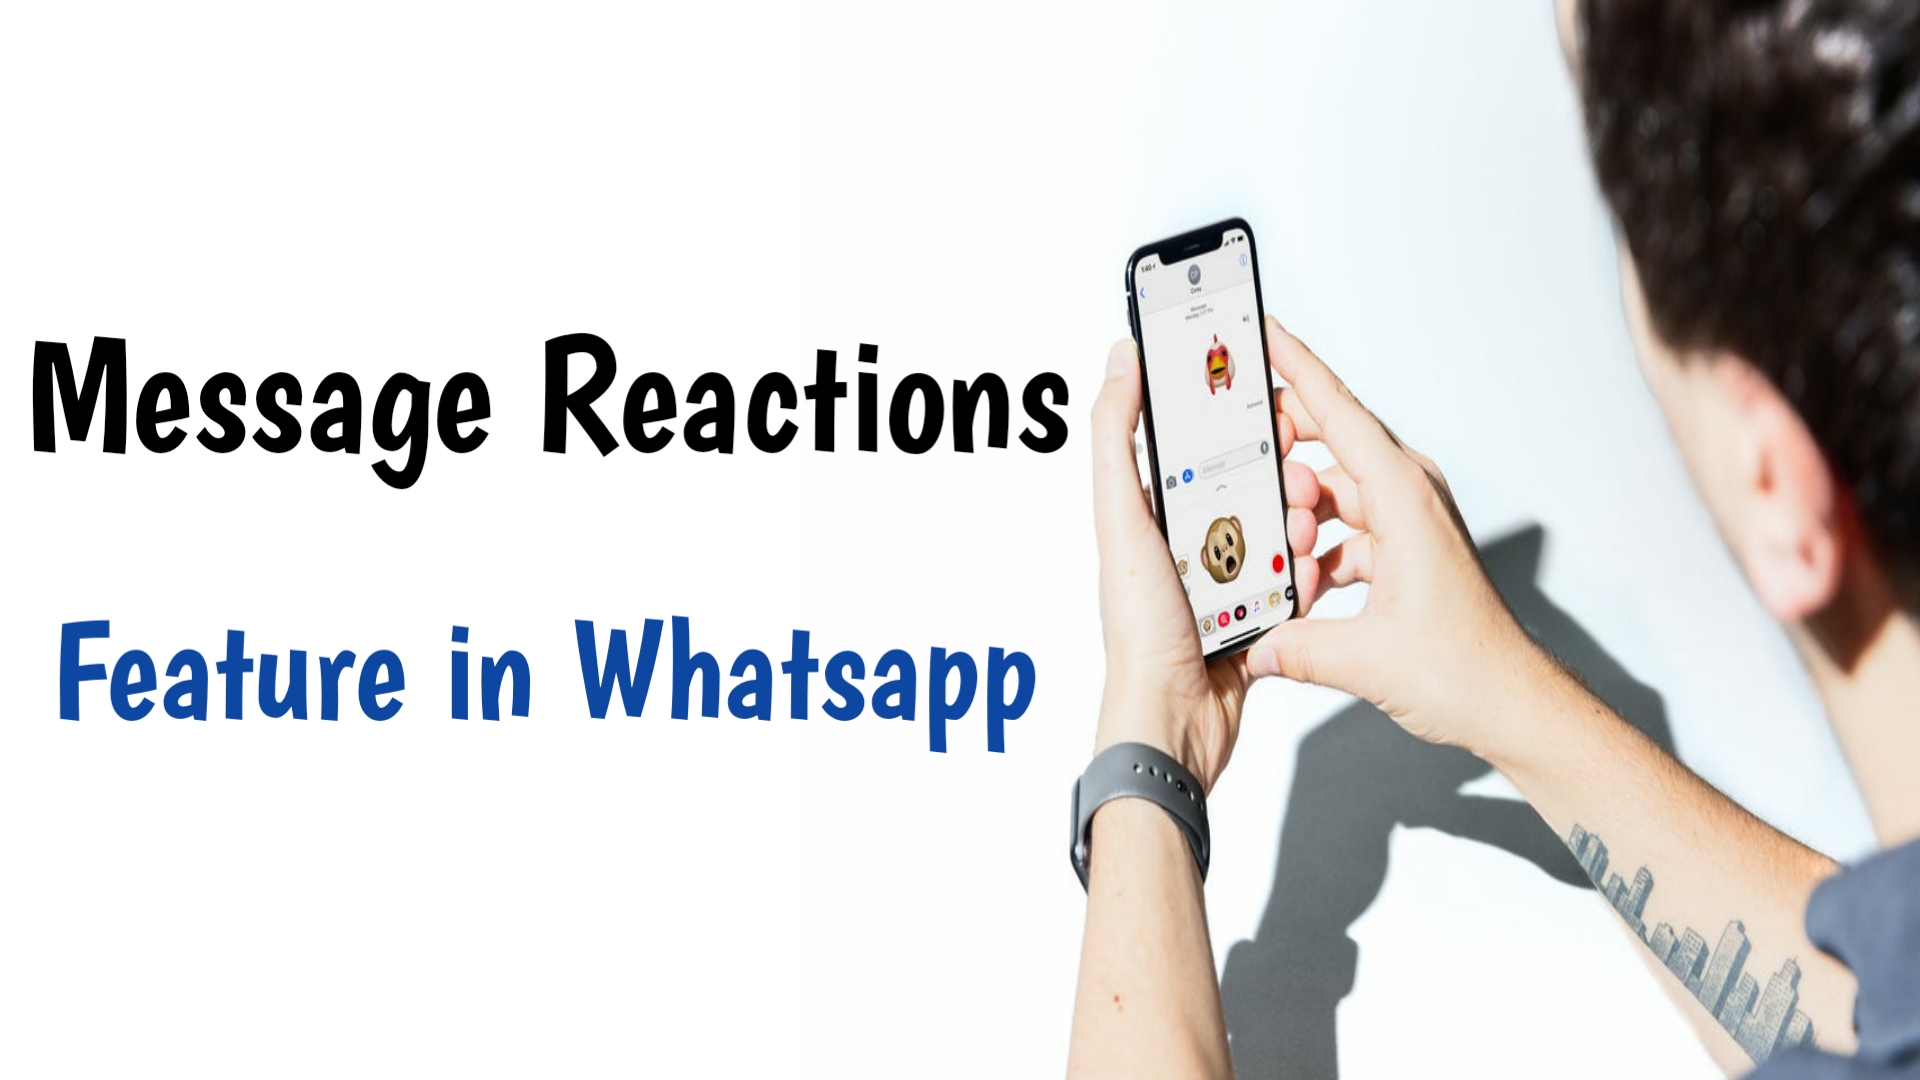 Work on testing the Message Reactions feature in WhatsApp